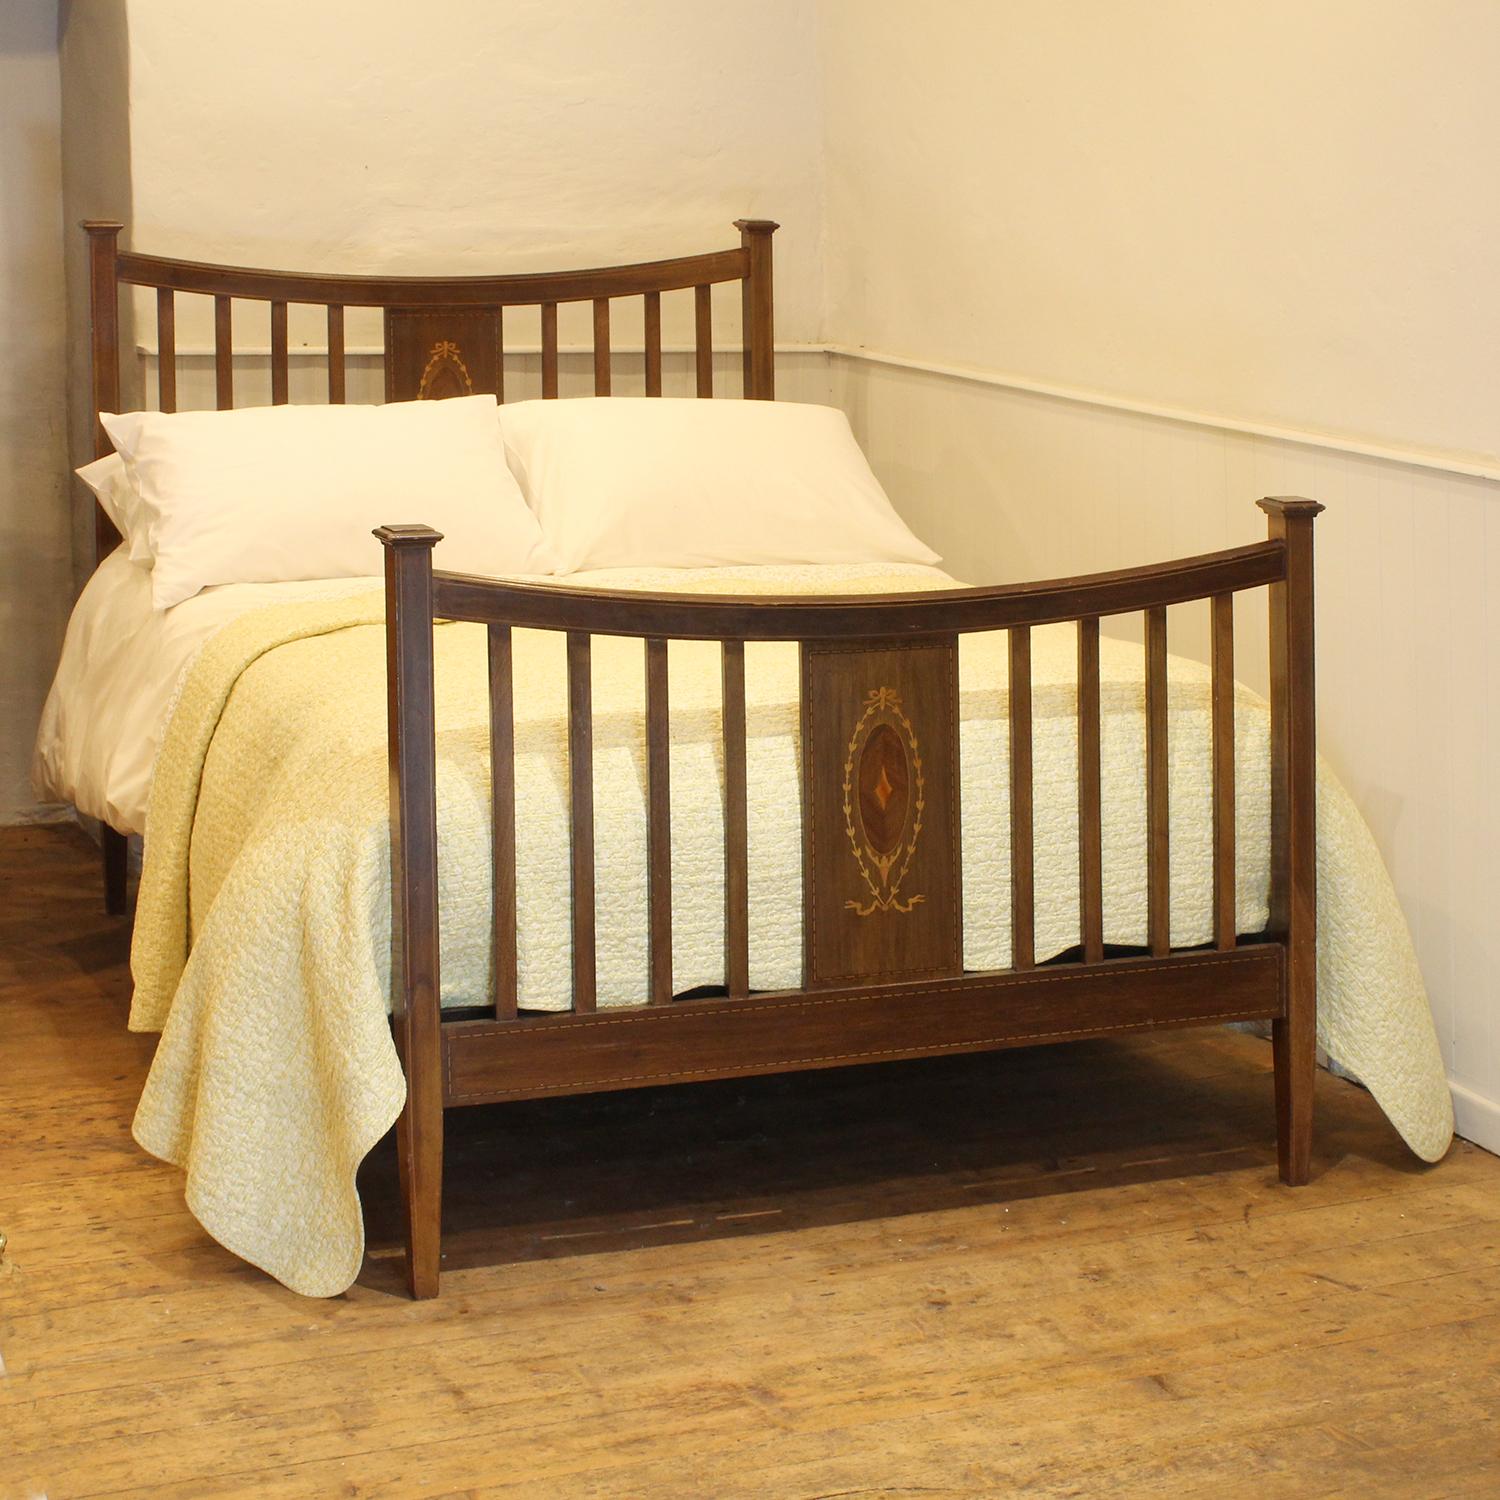 An Edwardian slatted bed in mahogany with fruitwood inlay work.

This bed accepts a standard double, 4ft 6in (54 in), base and mattress set, with a slight overlap.

The price is for the bed frame and a firm bed base. 

The mattress, sprung bed